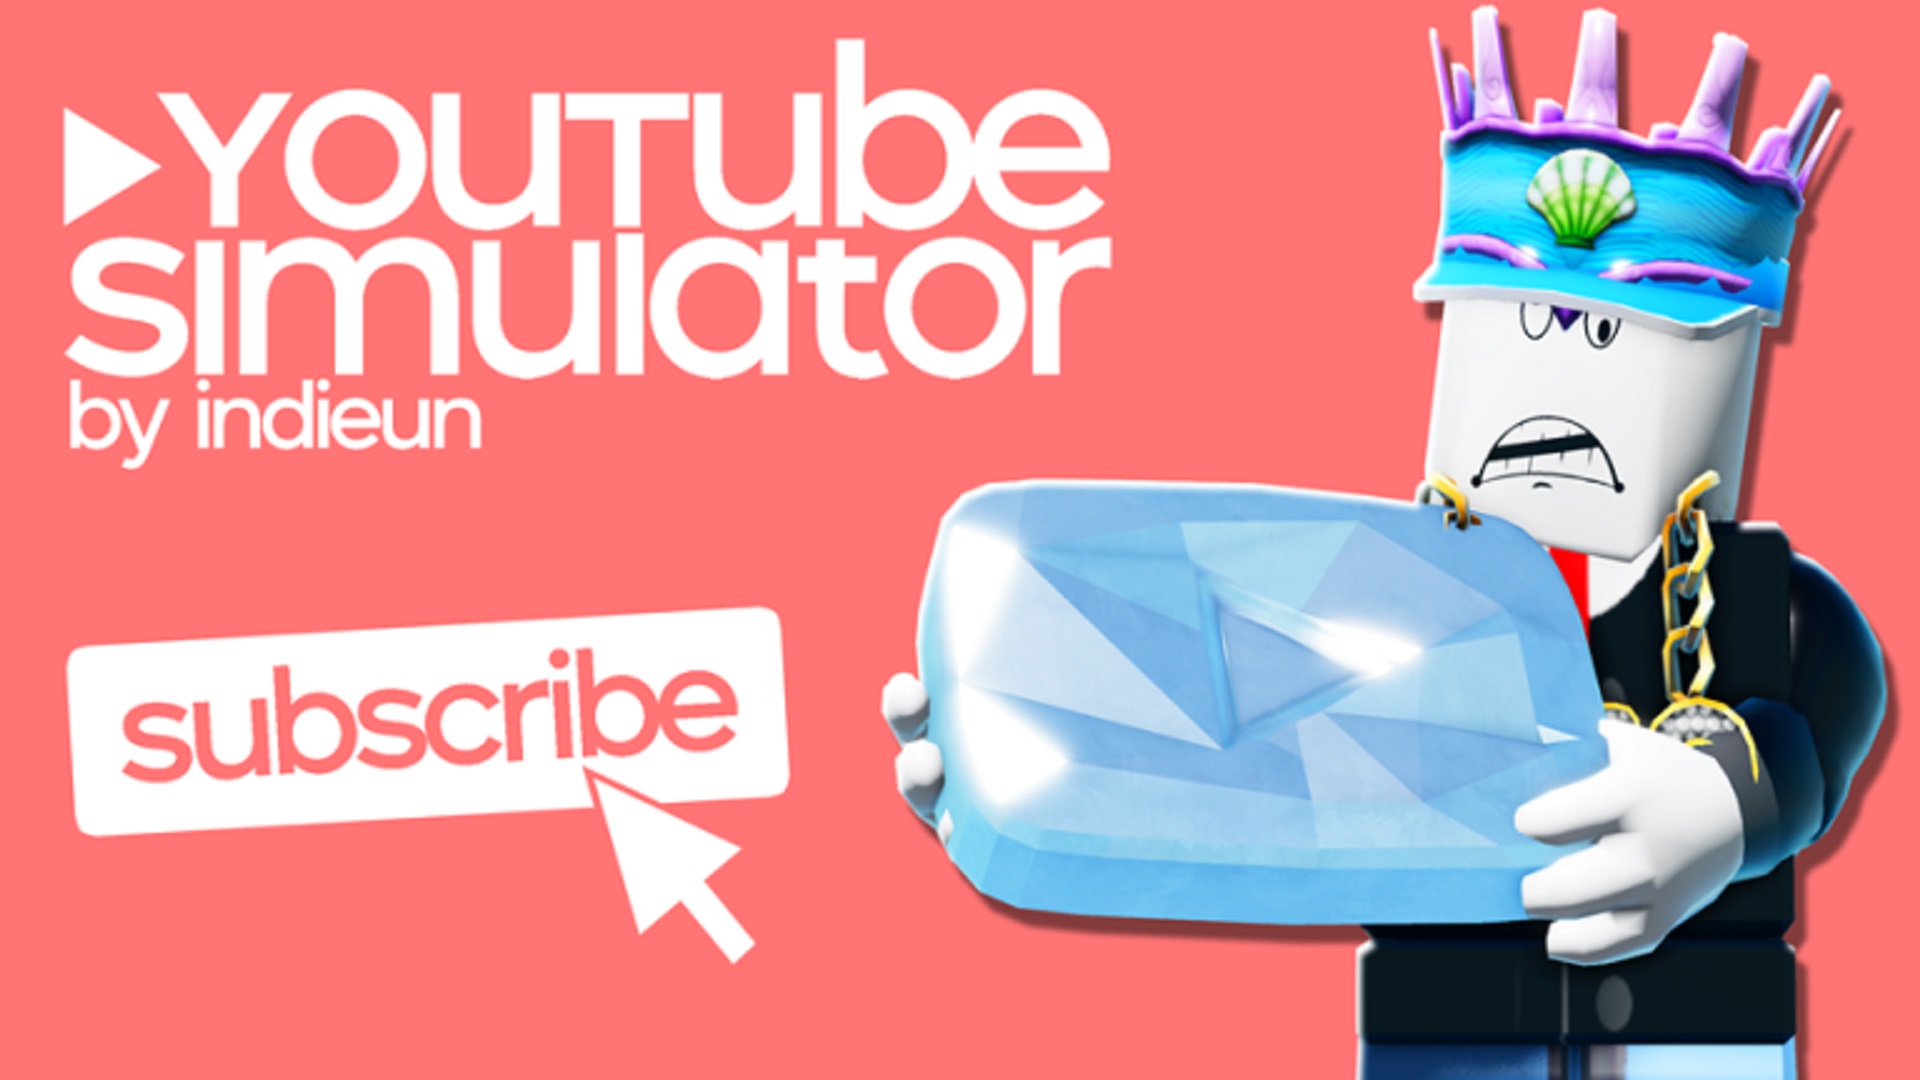 youtube-simulator-codes-free-in-game-goodies-pocket-tactics